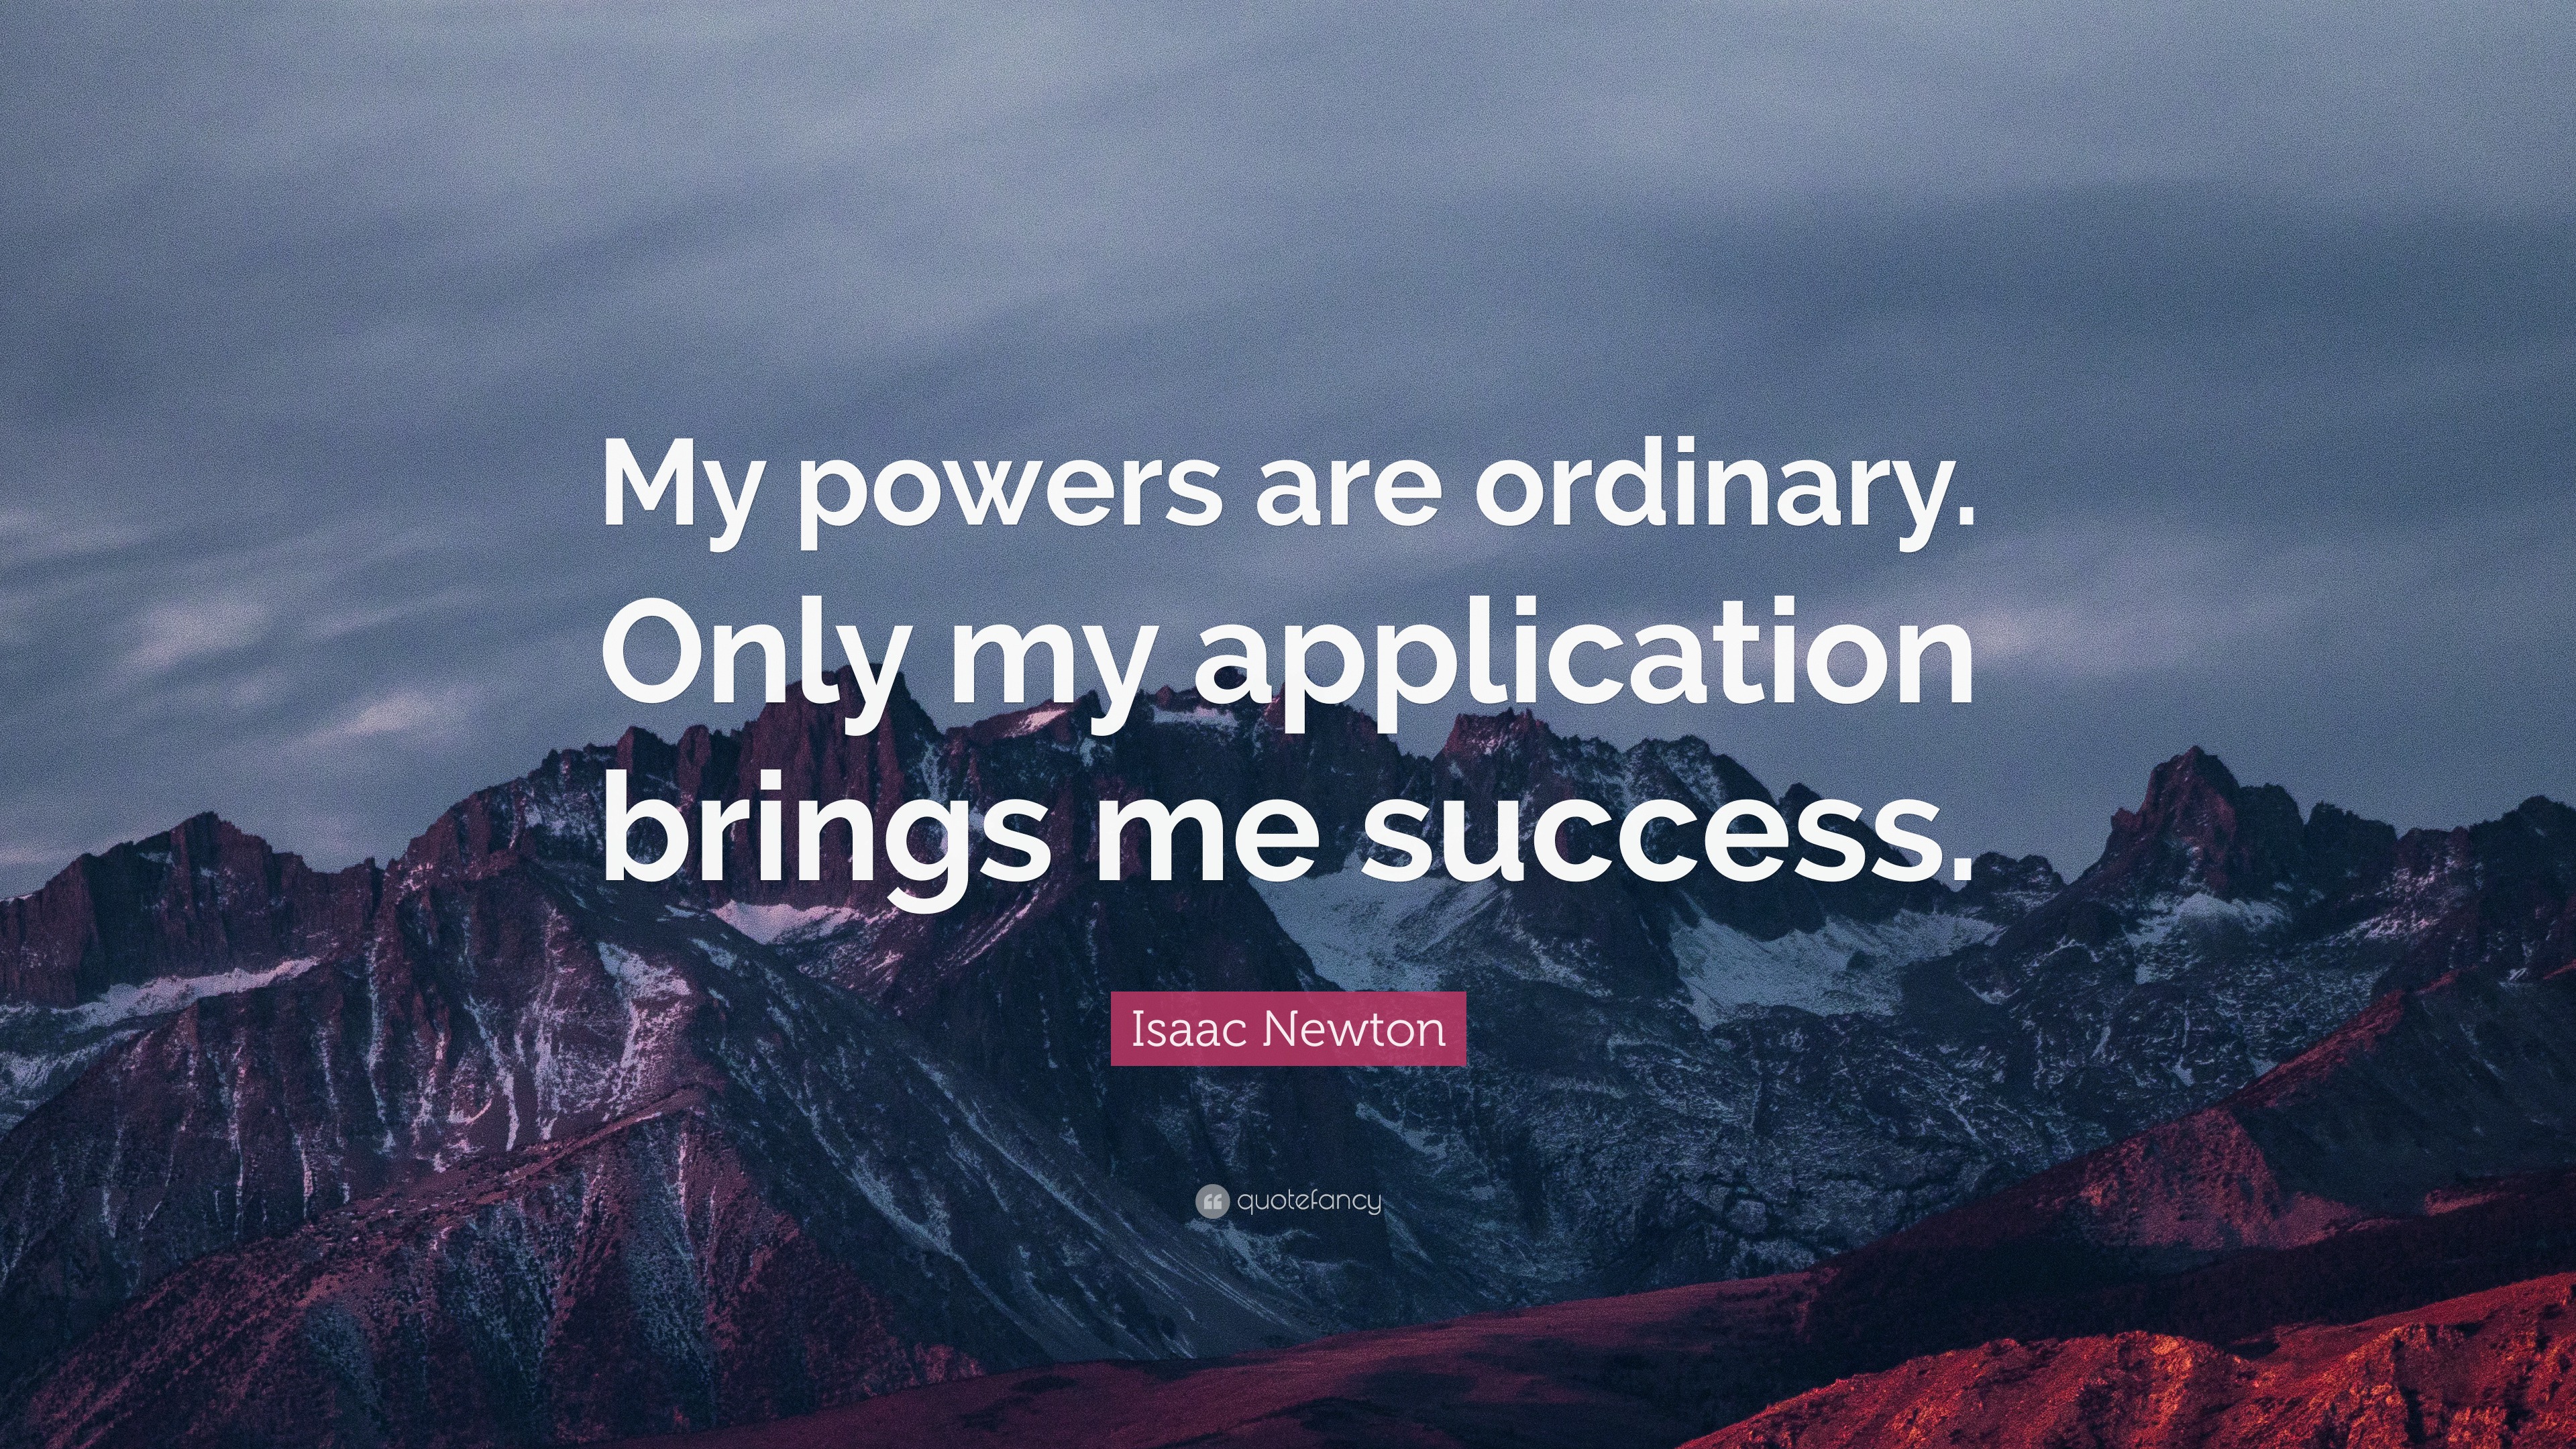 Isaac Newton Quote “my Powers Are Ordinary Only My Application Brings Me Success” 4420